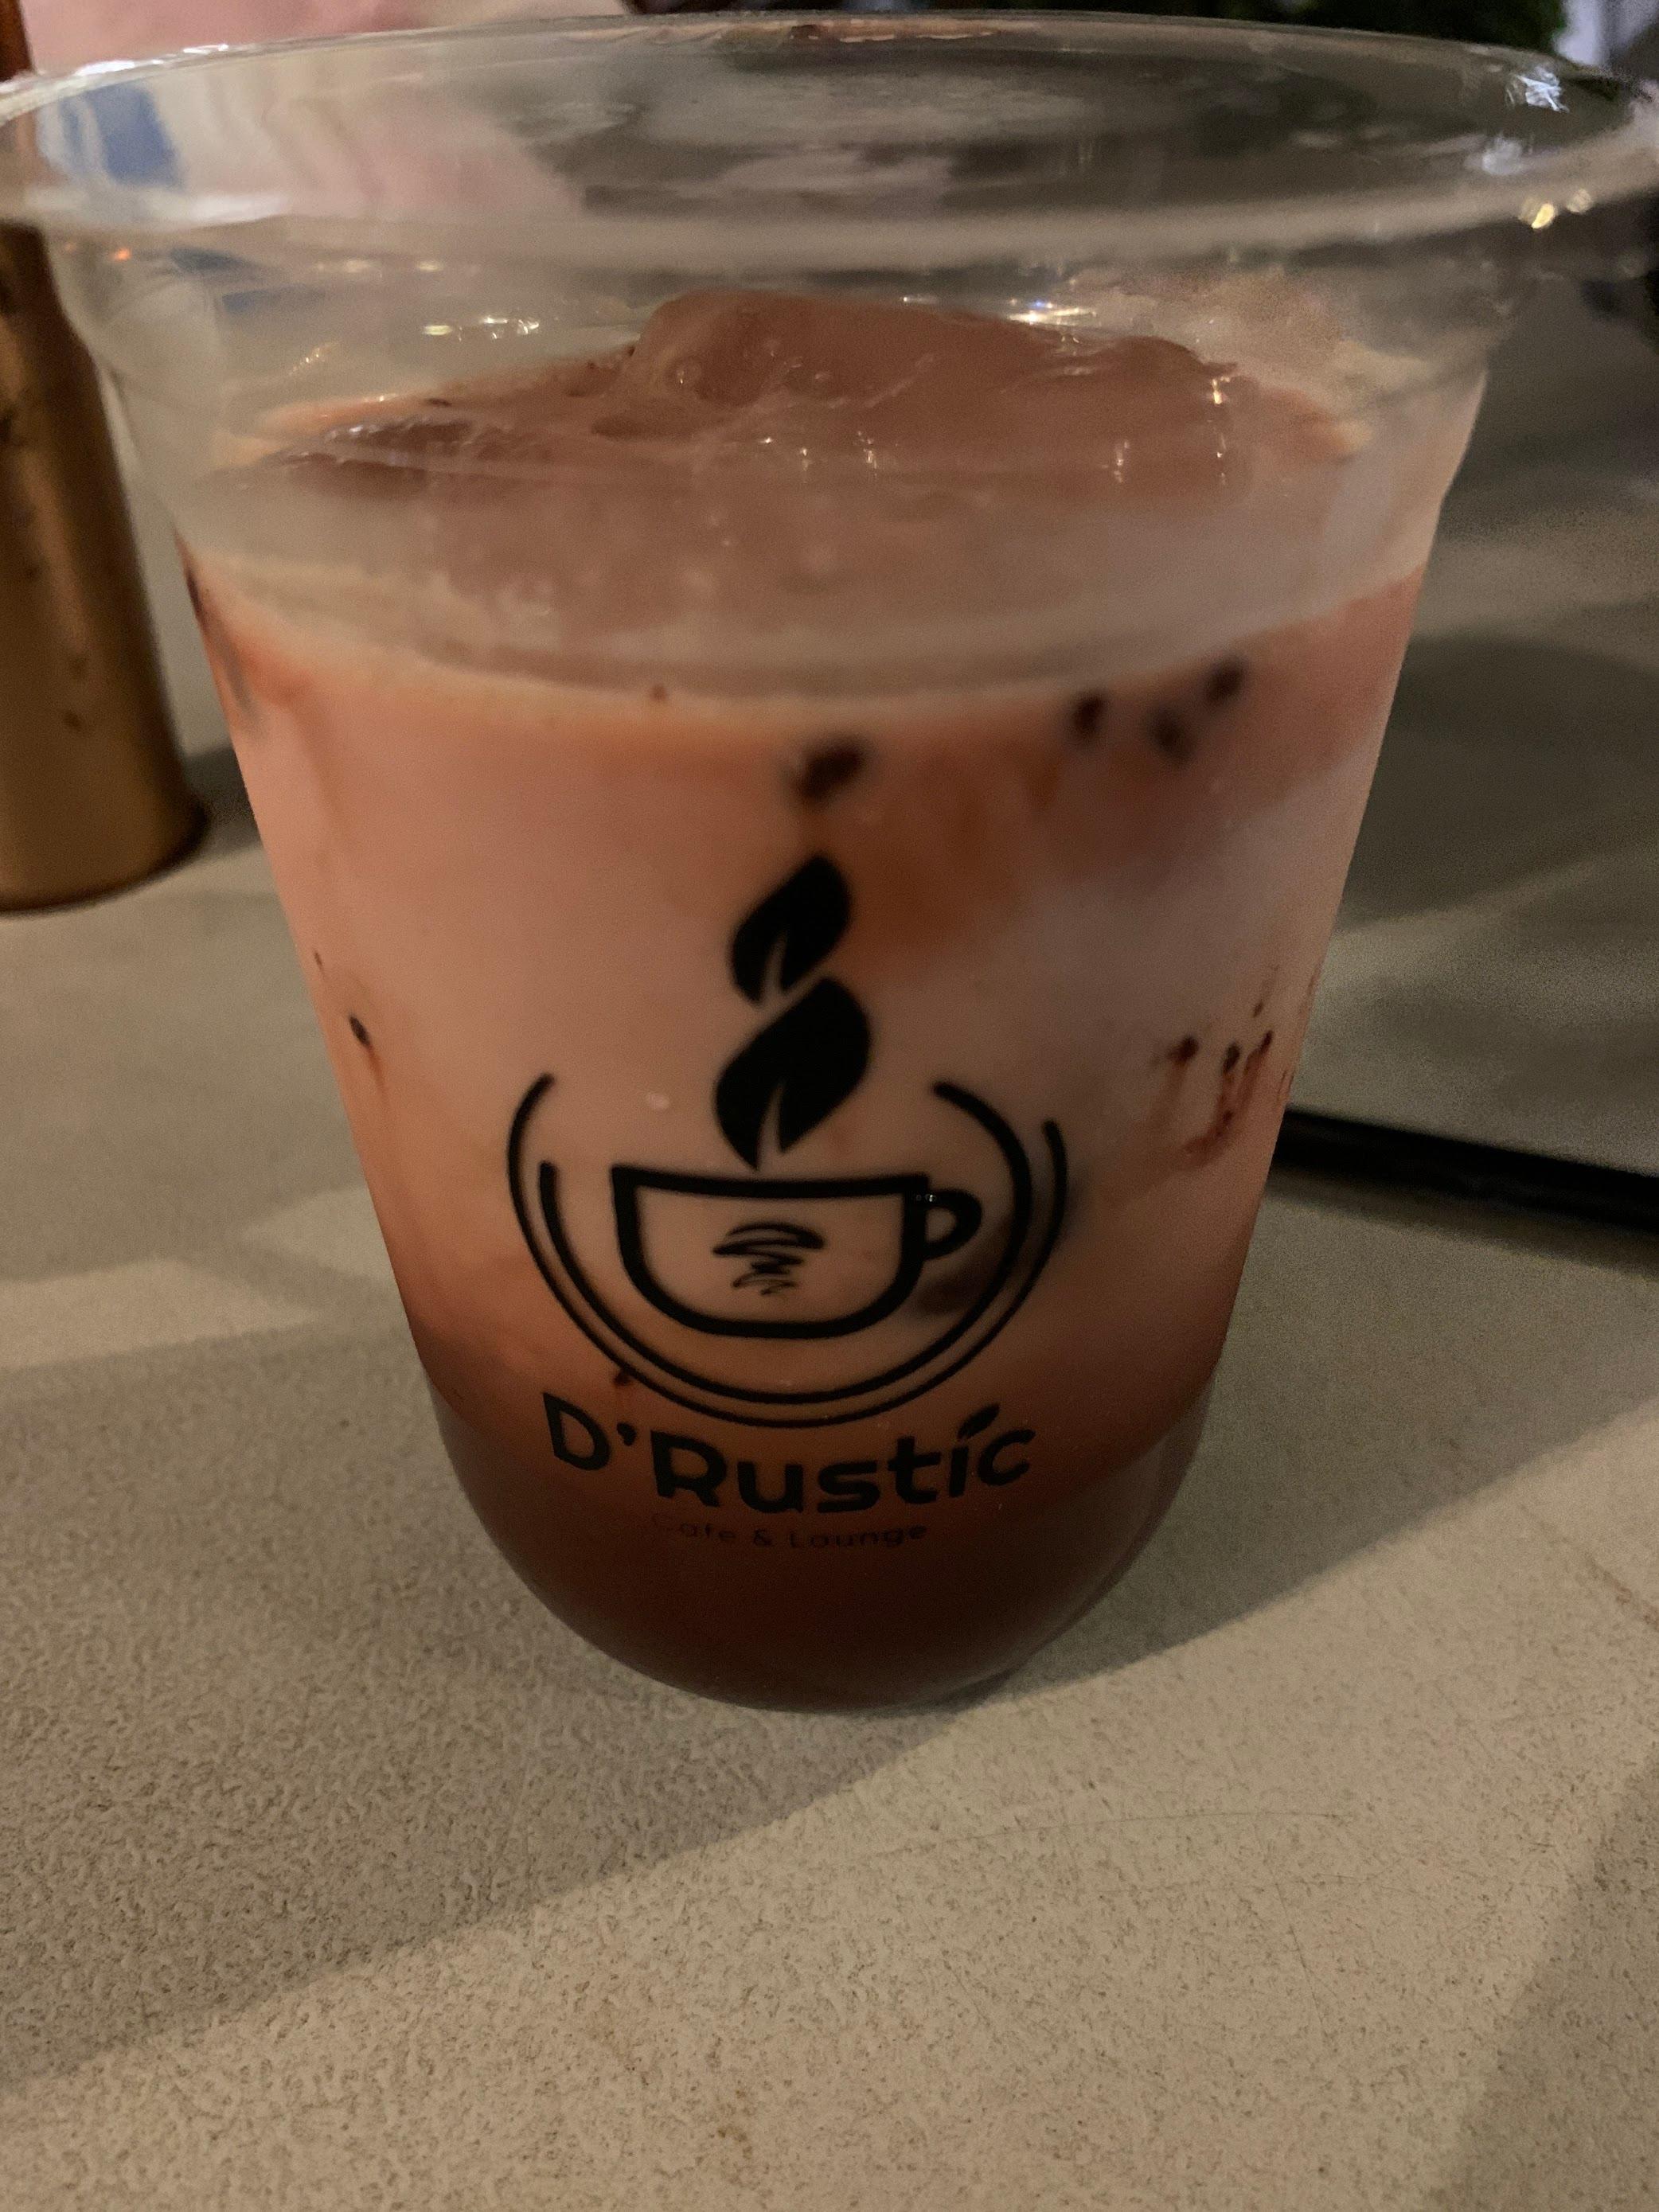 D'Rustic Cafe review